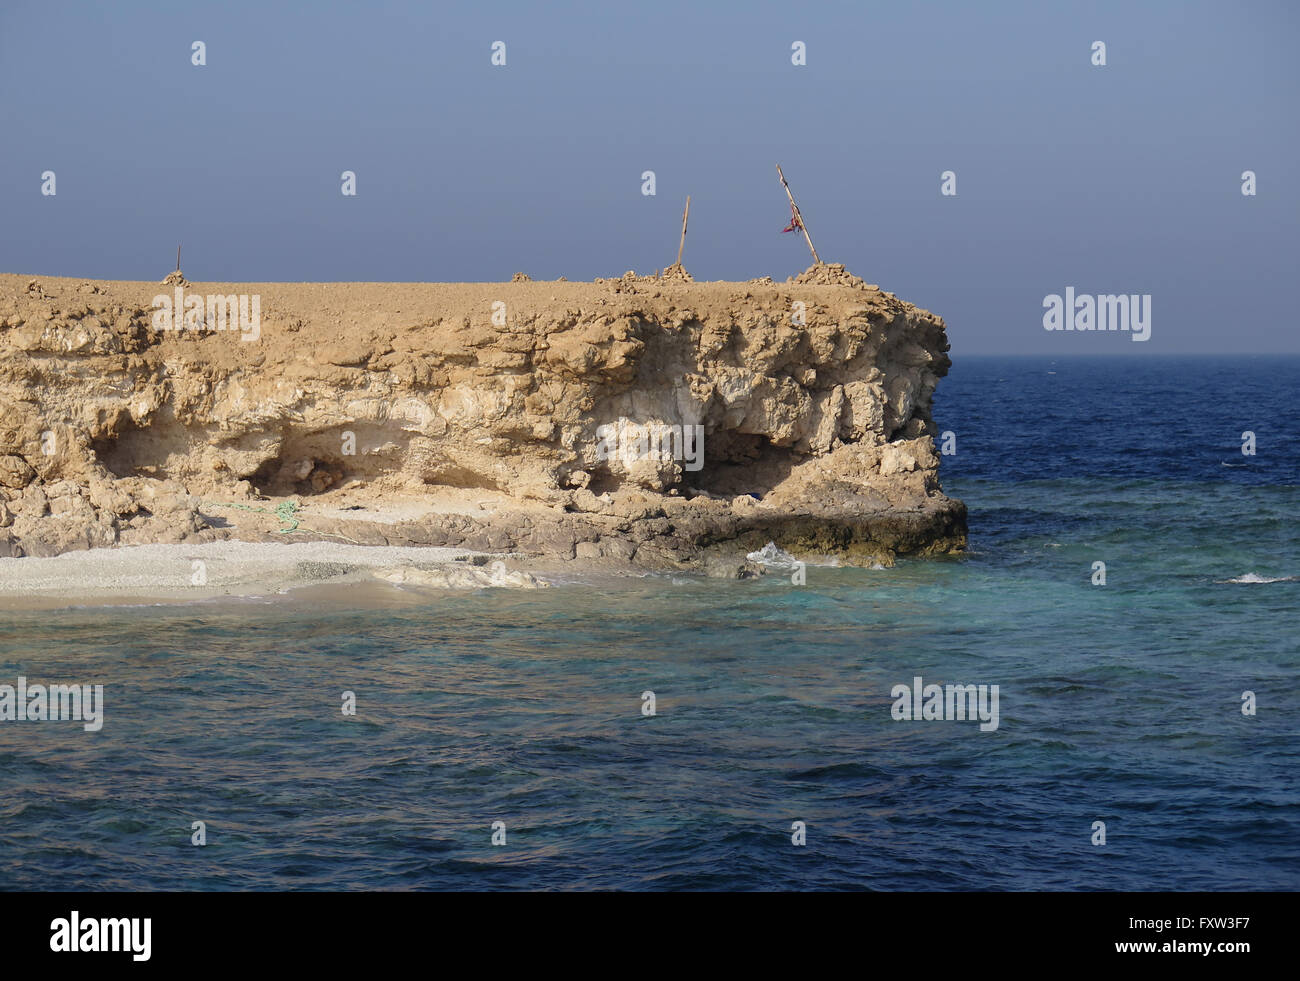 Insel, wenig Mühe, Brother Islands, Rotes Meer, Aegypten Stockfoto